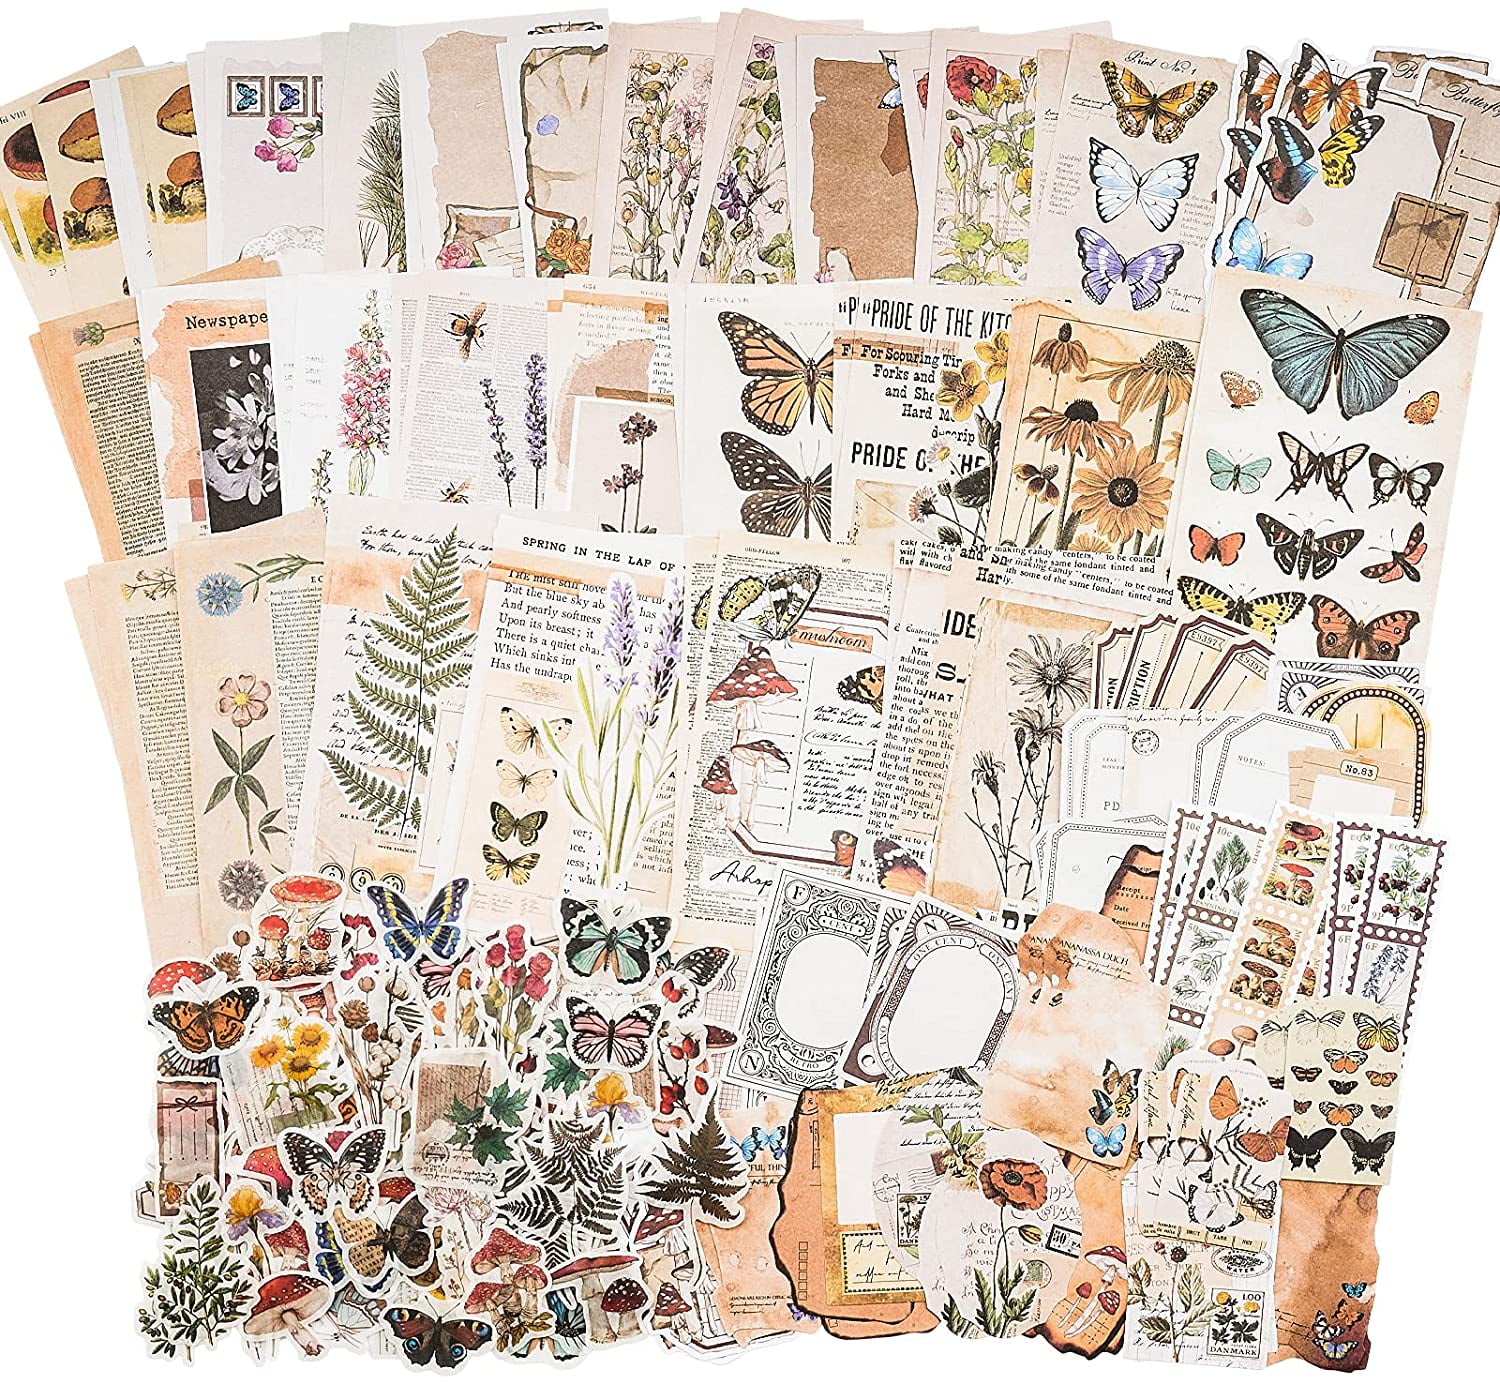  400 PCS Vintage Scrapbooking Paper Junk Journal Supplies Kit  Aesthetic Decorative Craft Paper Retro DIY Papers for Art Journaling Bullet  Journals Planners Embellishment : Arts, Crafts & Sewing